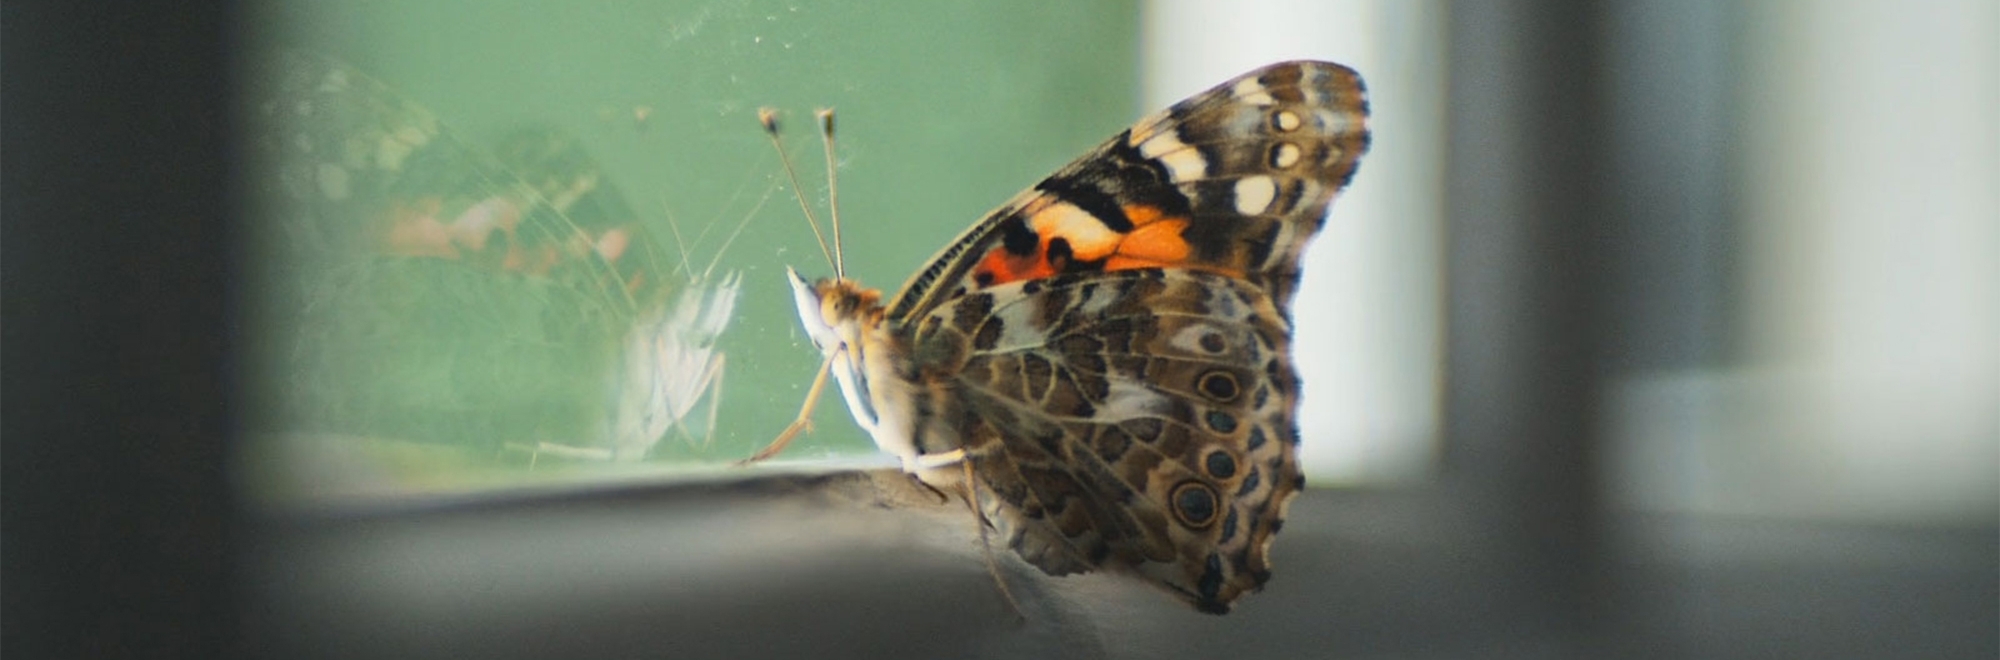 The Guardian uses a butterfly to powerful effect in its TV ad ‘Change is possible. Hope is power’